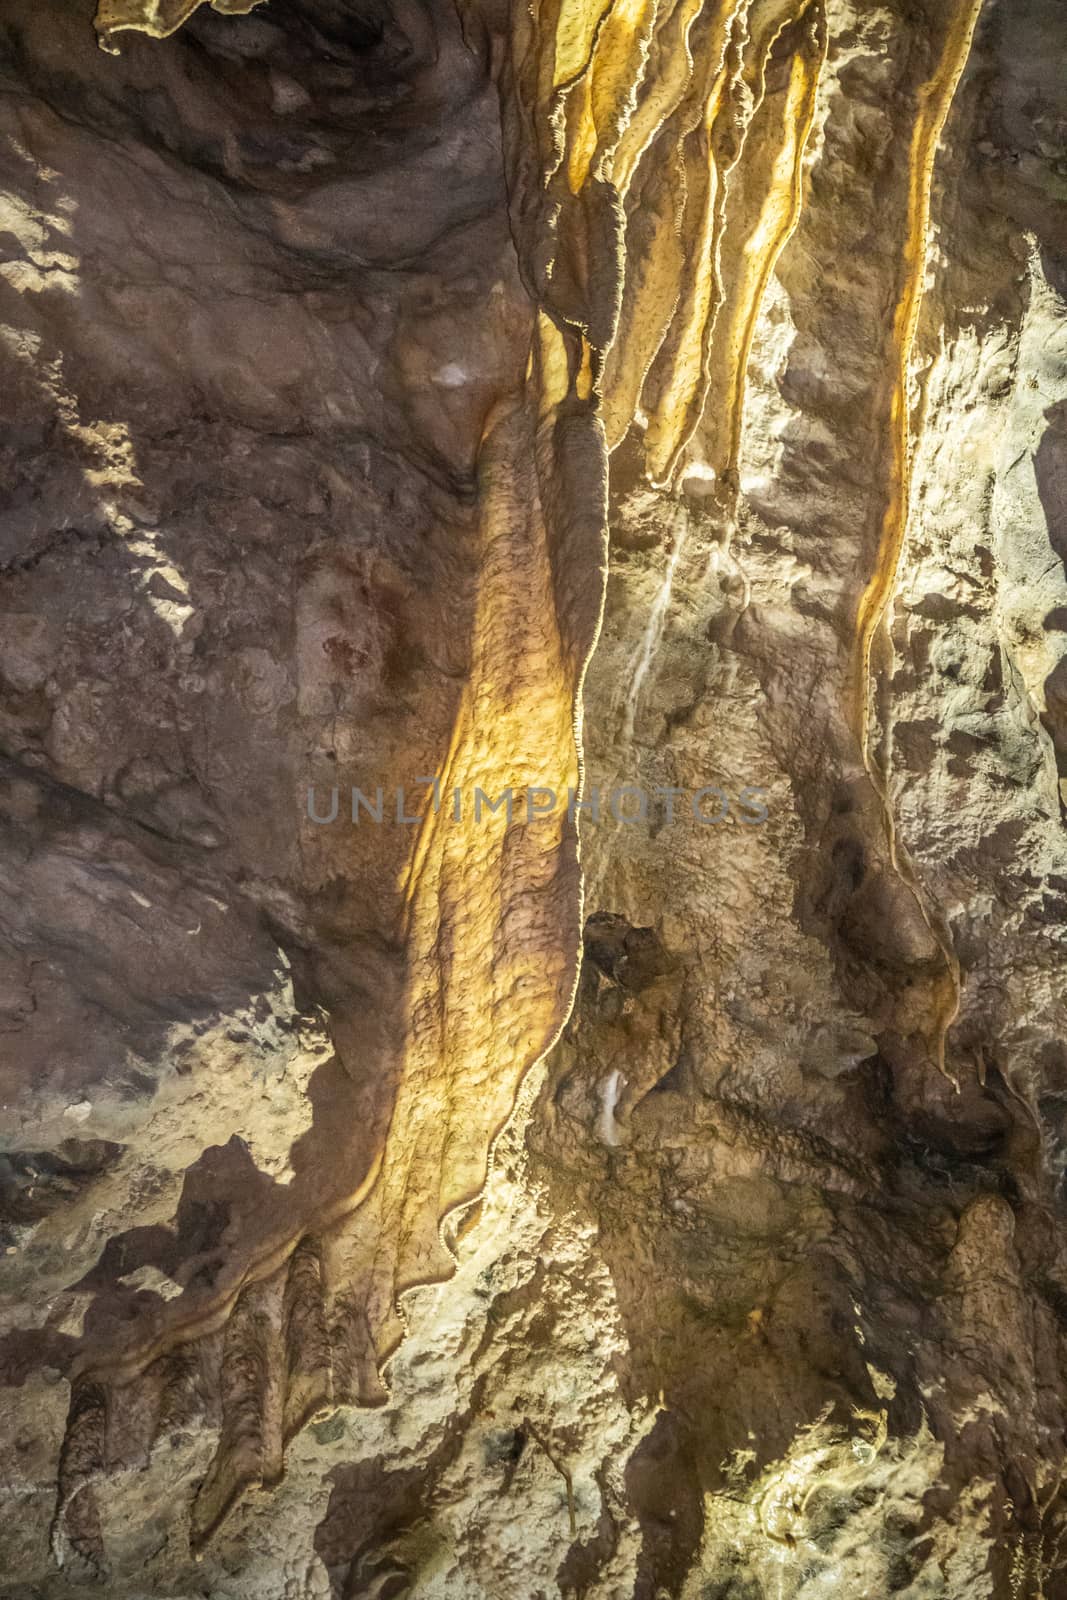 Han-sur-Lesse, Belgium - June 25, 2019: Grottes-de-Han 14 of 36. subterranean pictures of Stalagmites and stalactites in different shapes and colors throughout tunnels, caverns and large halls. Rock curtains.